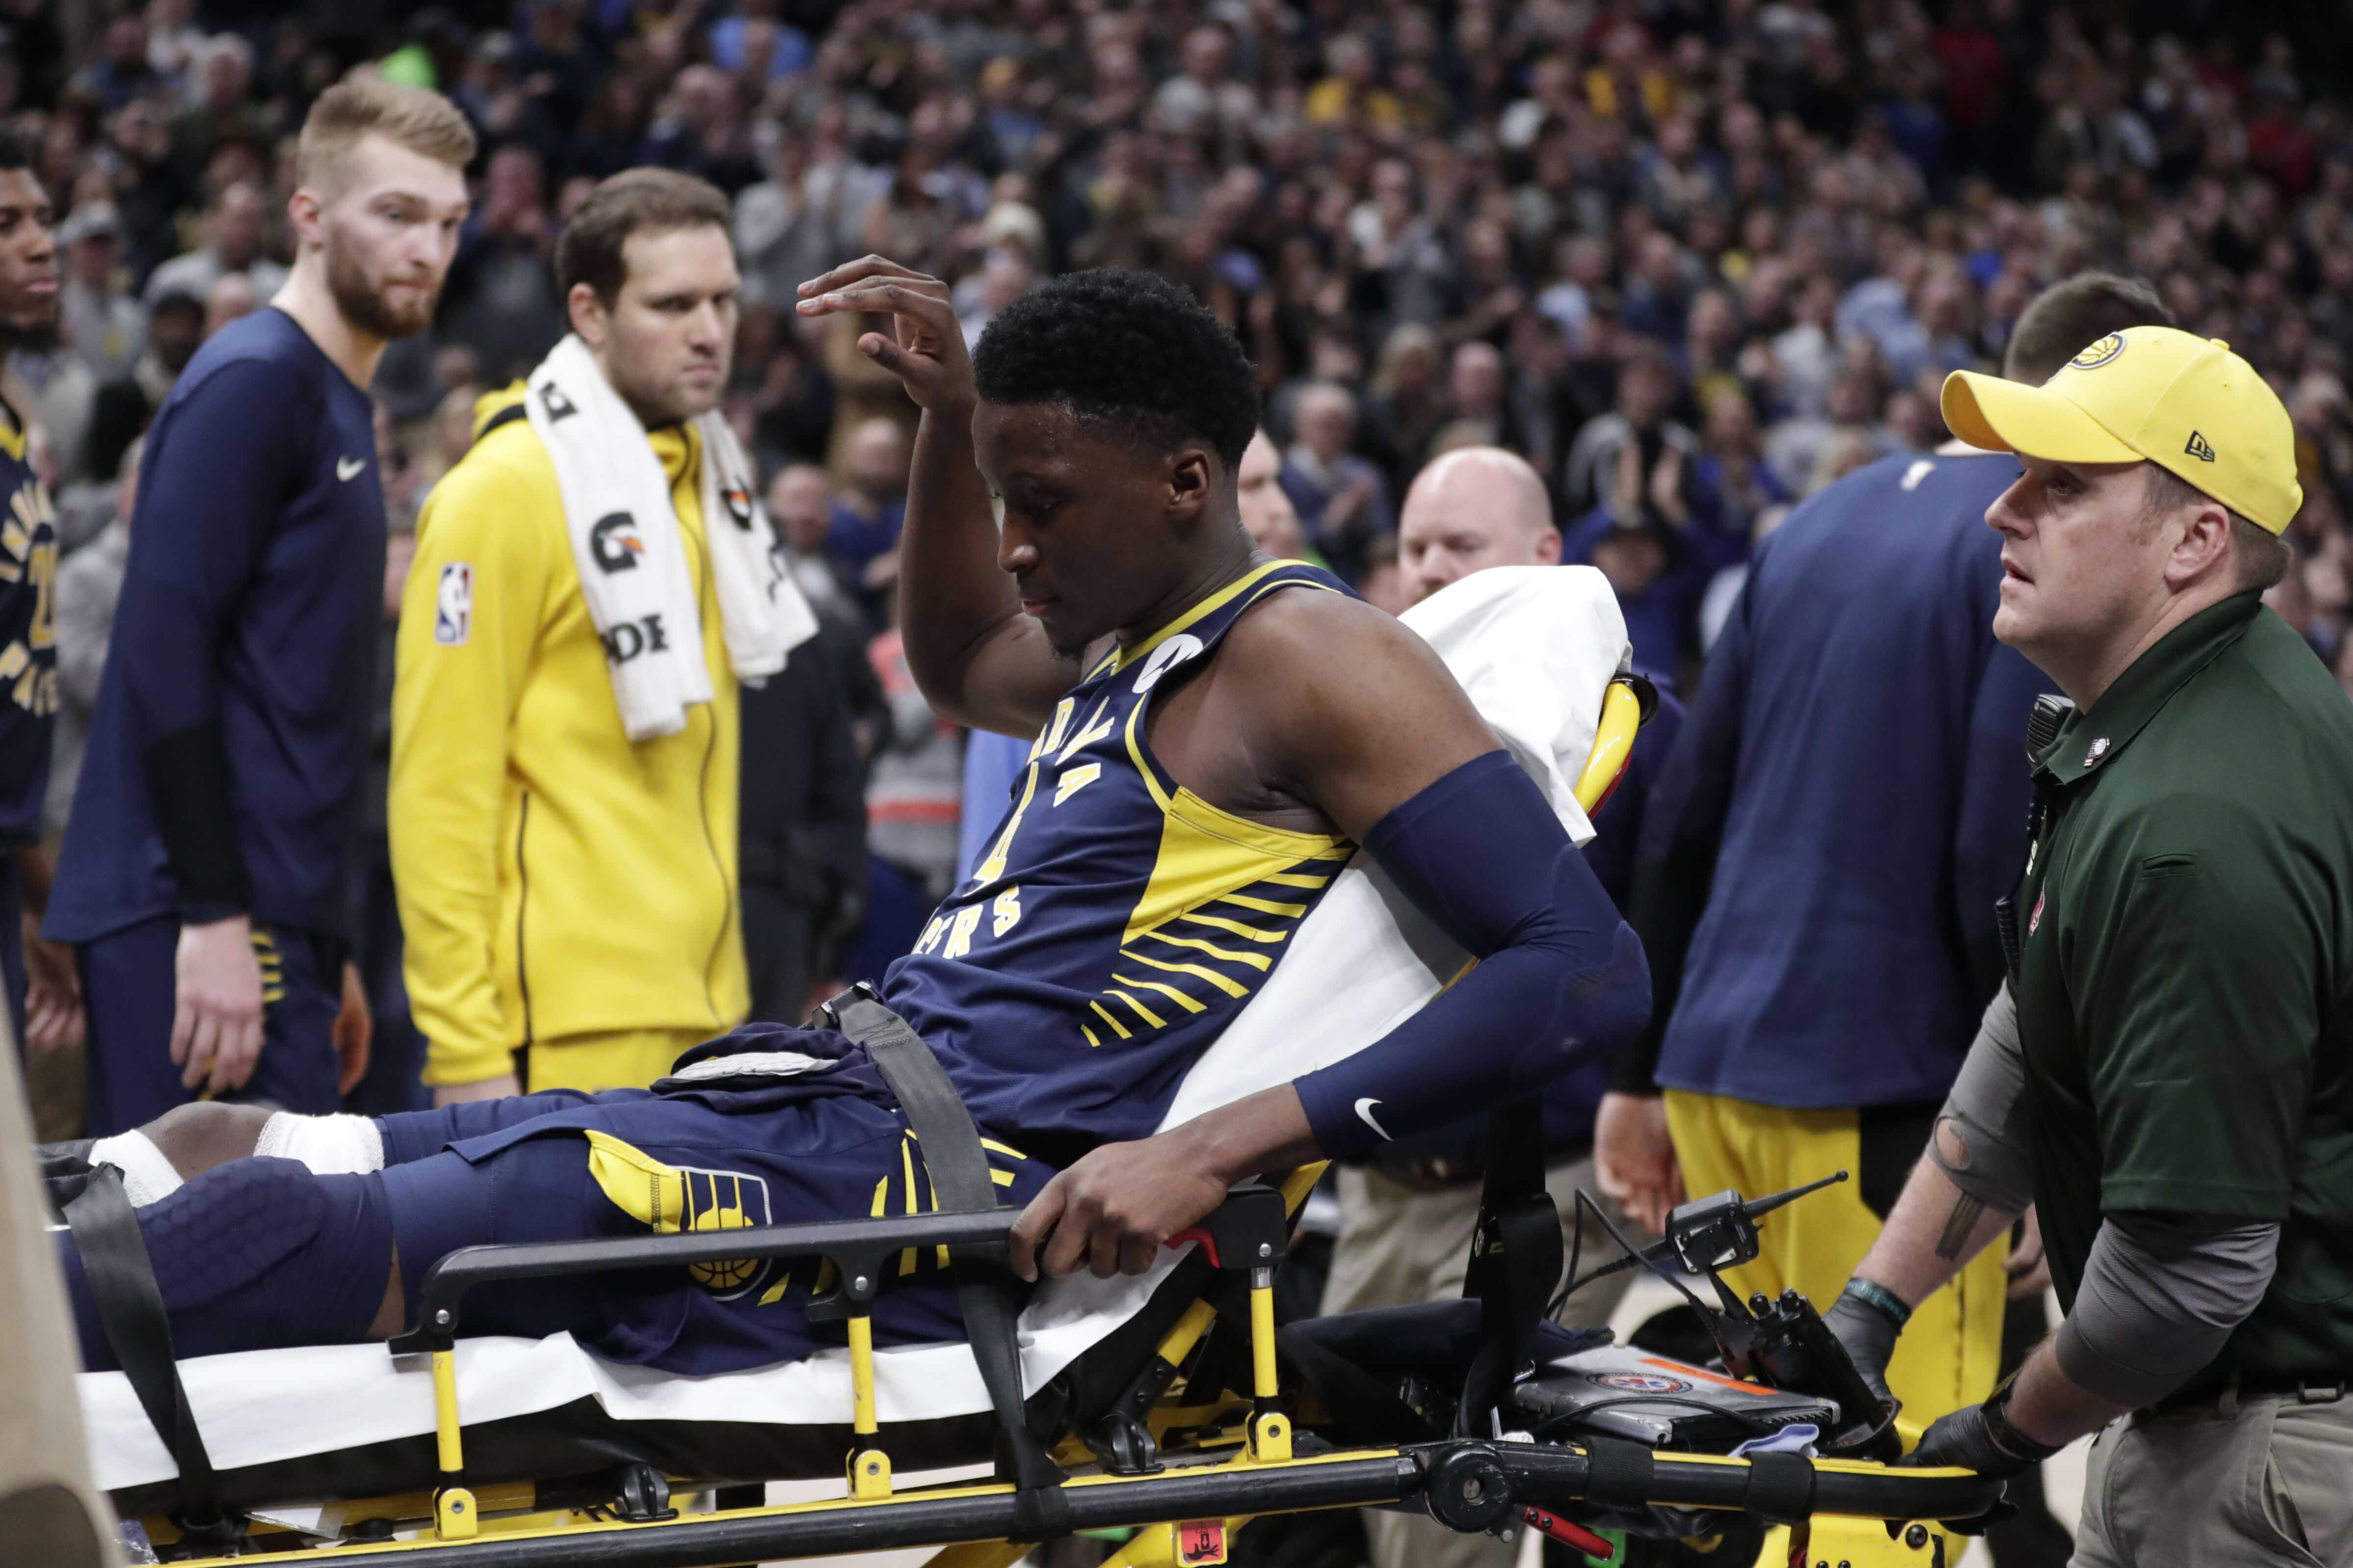 Indiana Pacers guard Victor Oladipo is taken off the court on a stretcher after he was injured during the first half of the team's game against the Toronto Raptors in Indianapolis on Wednesday.